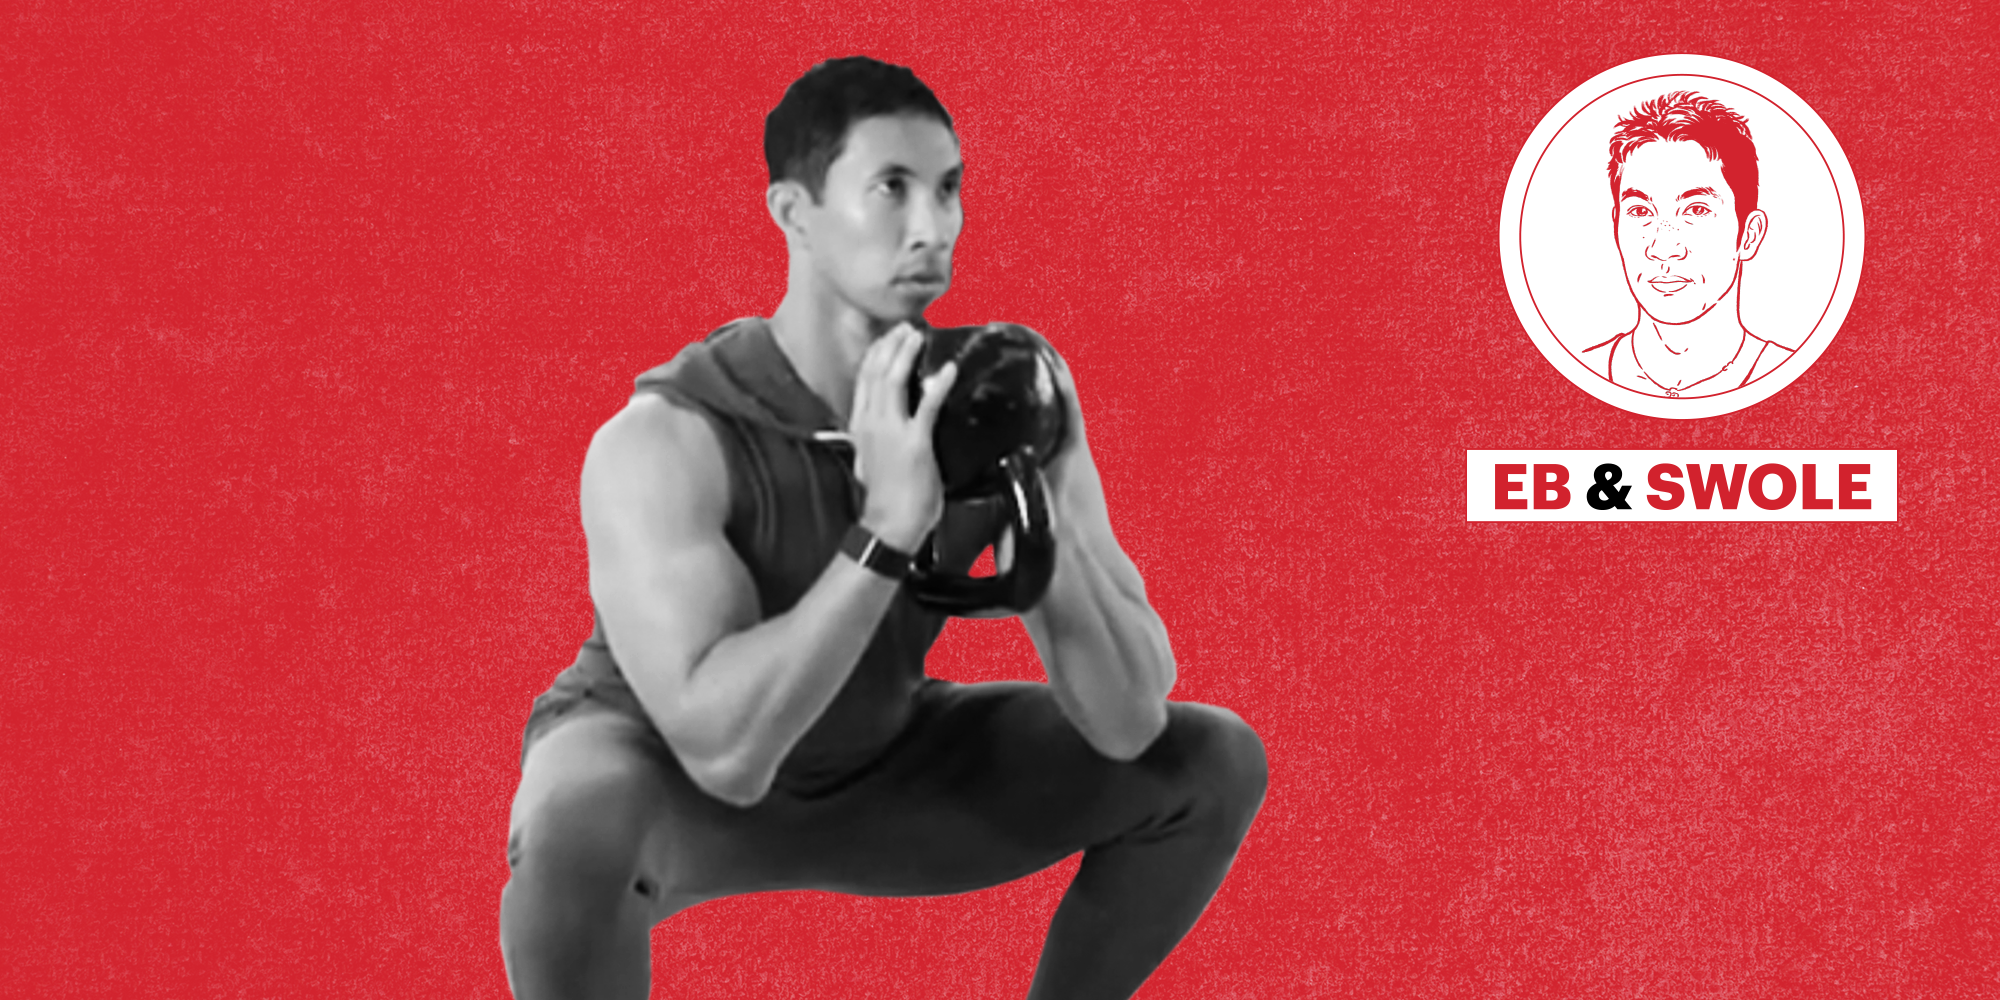 Alternative Lower Back Squat Exercises to Try: Give the Low Back a